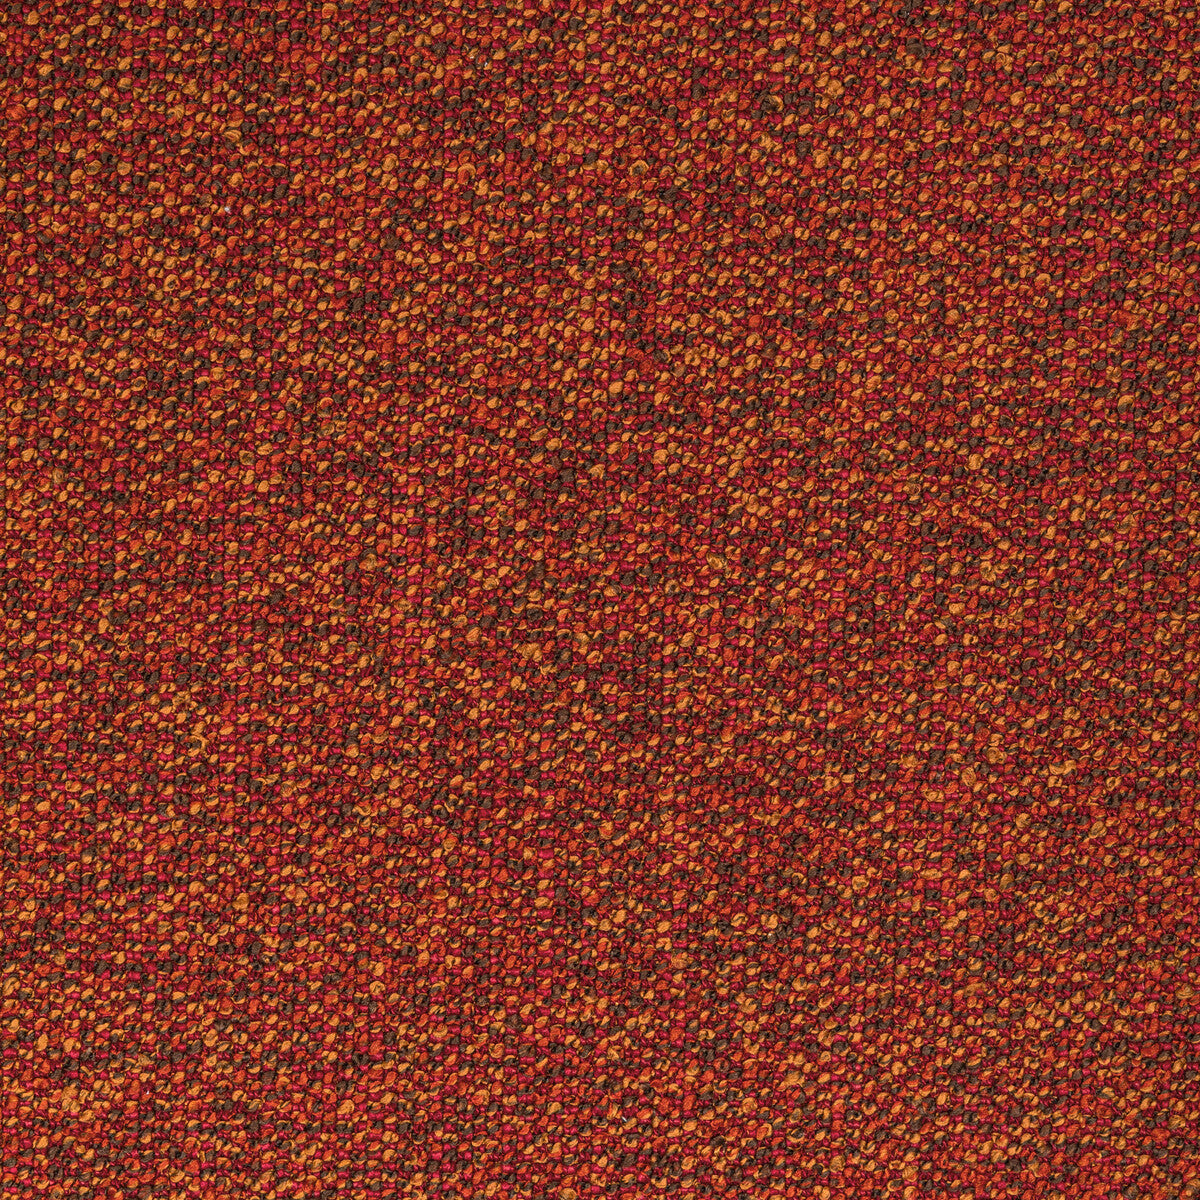 Mathis fabric in chili color - pattern 36699.924.0 - by Kravet Contract in the Refined Textures Performance Crypton collection